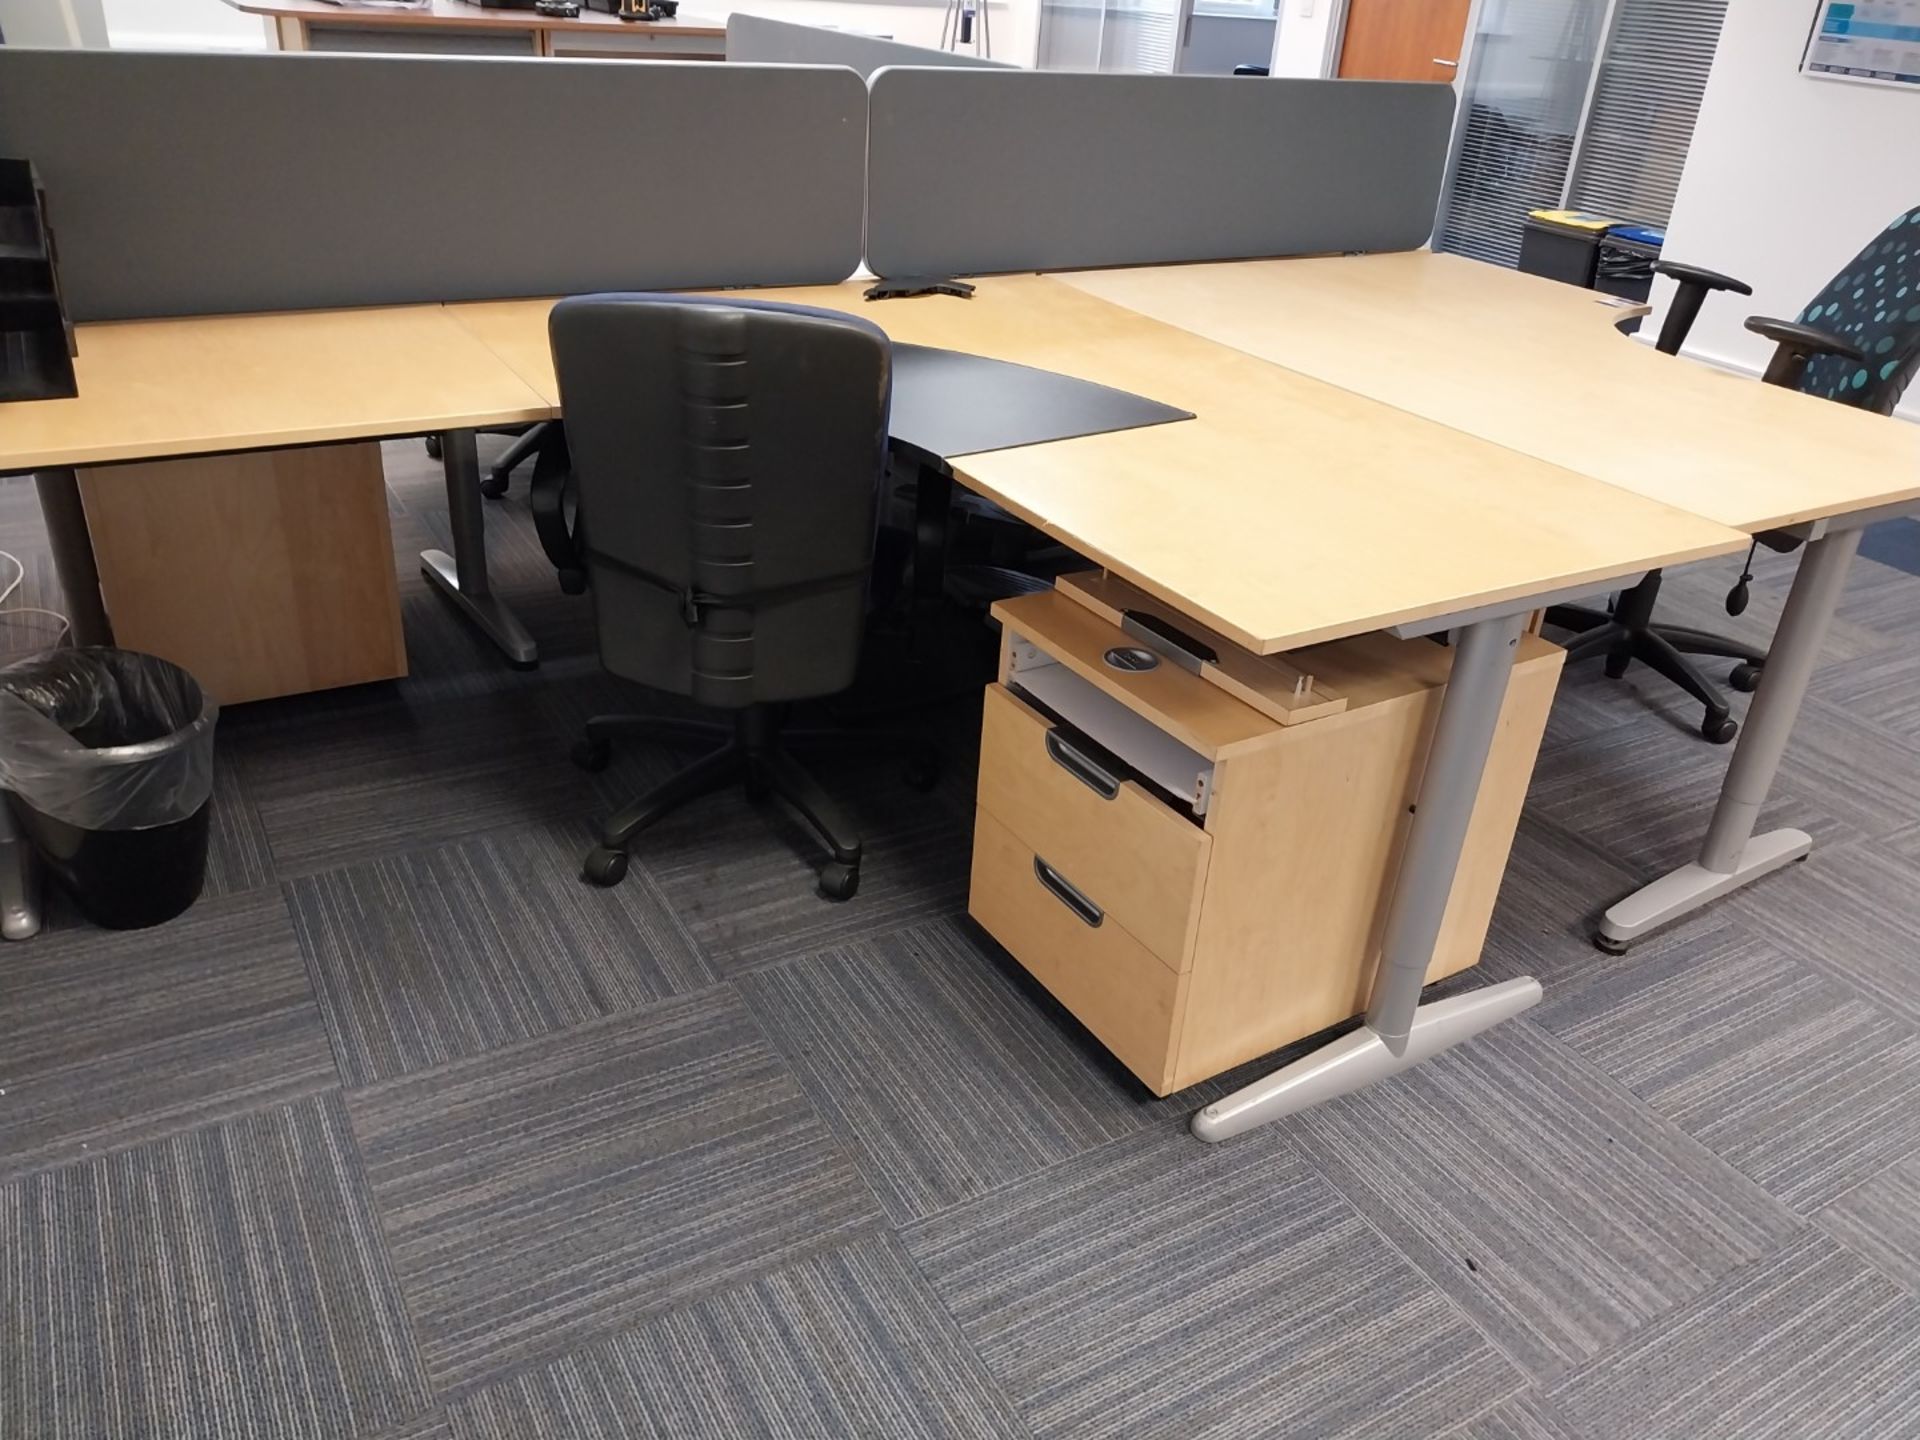 4 x curved office desks 1600mm(w) x 1200mm(d), 4 x - Image 4 of 4